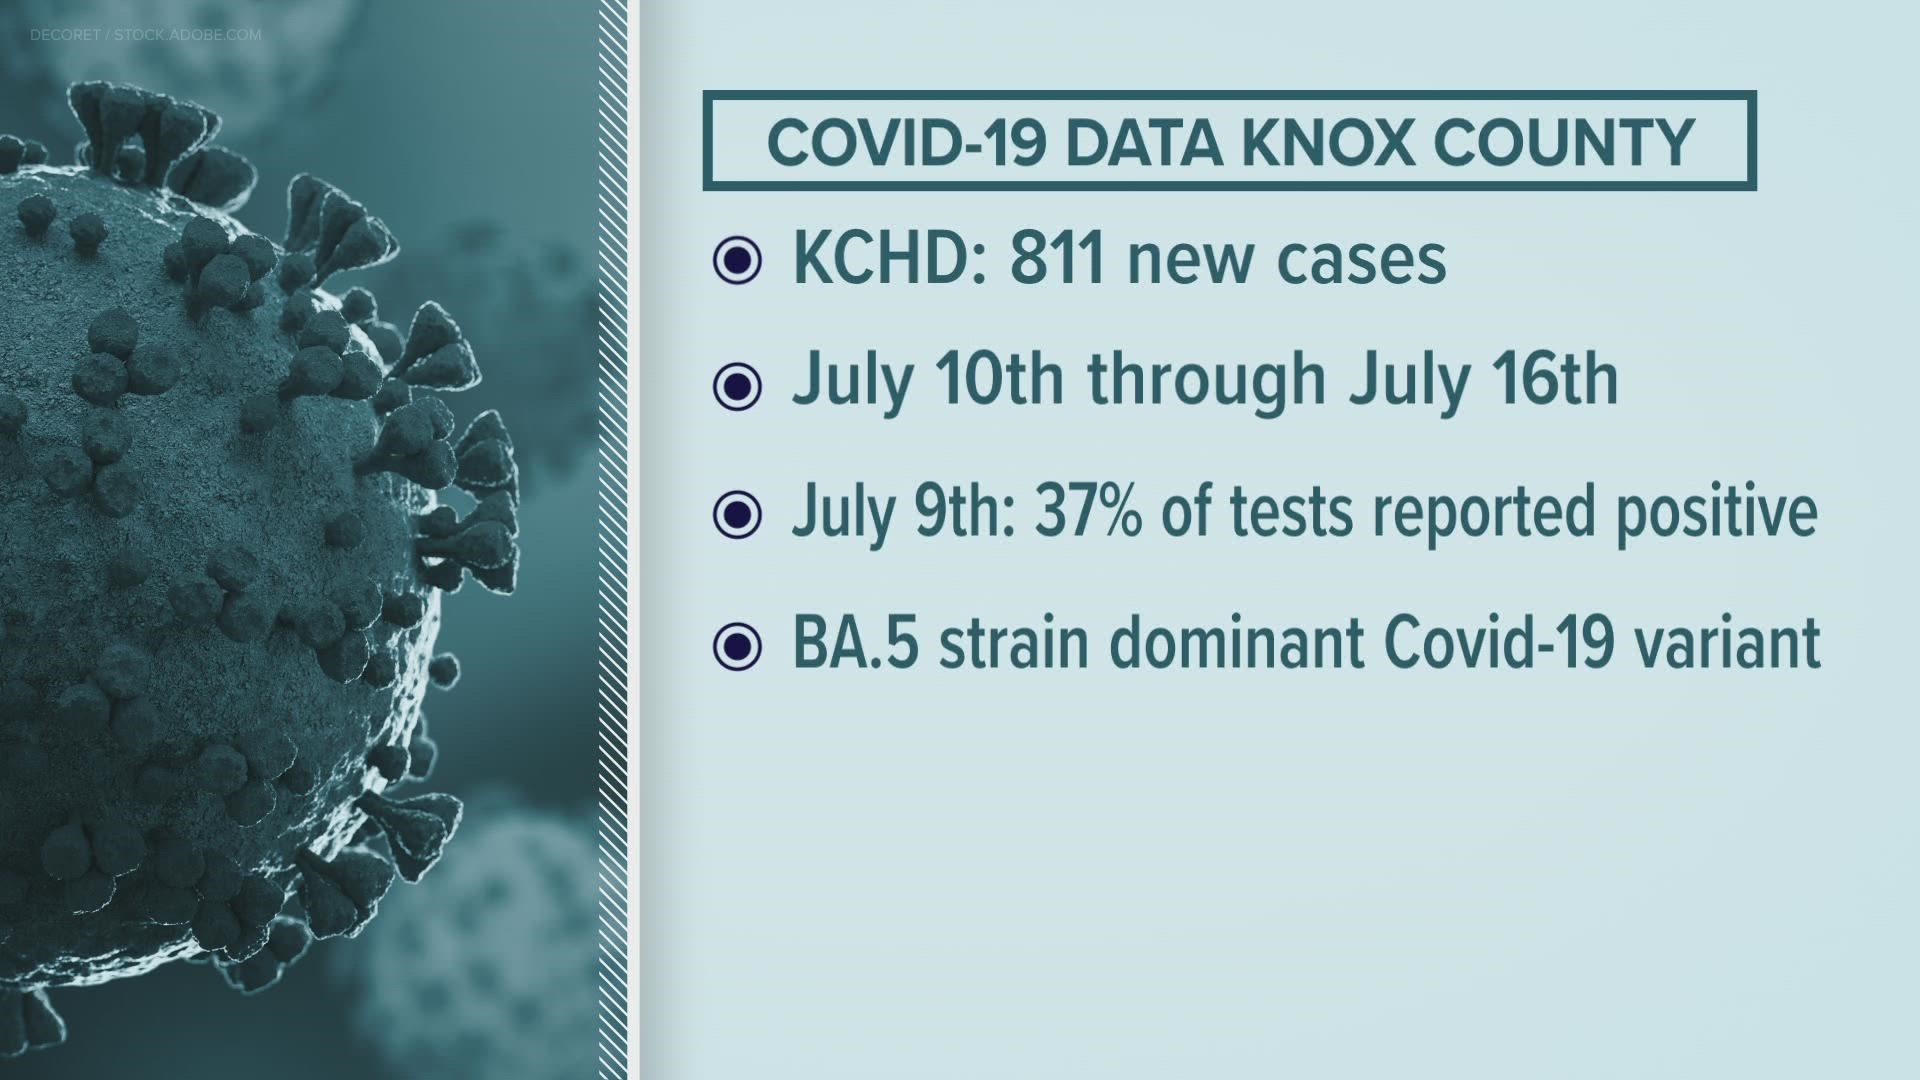 The health department reported more than 800 new cases between July 10 and July 16.